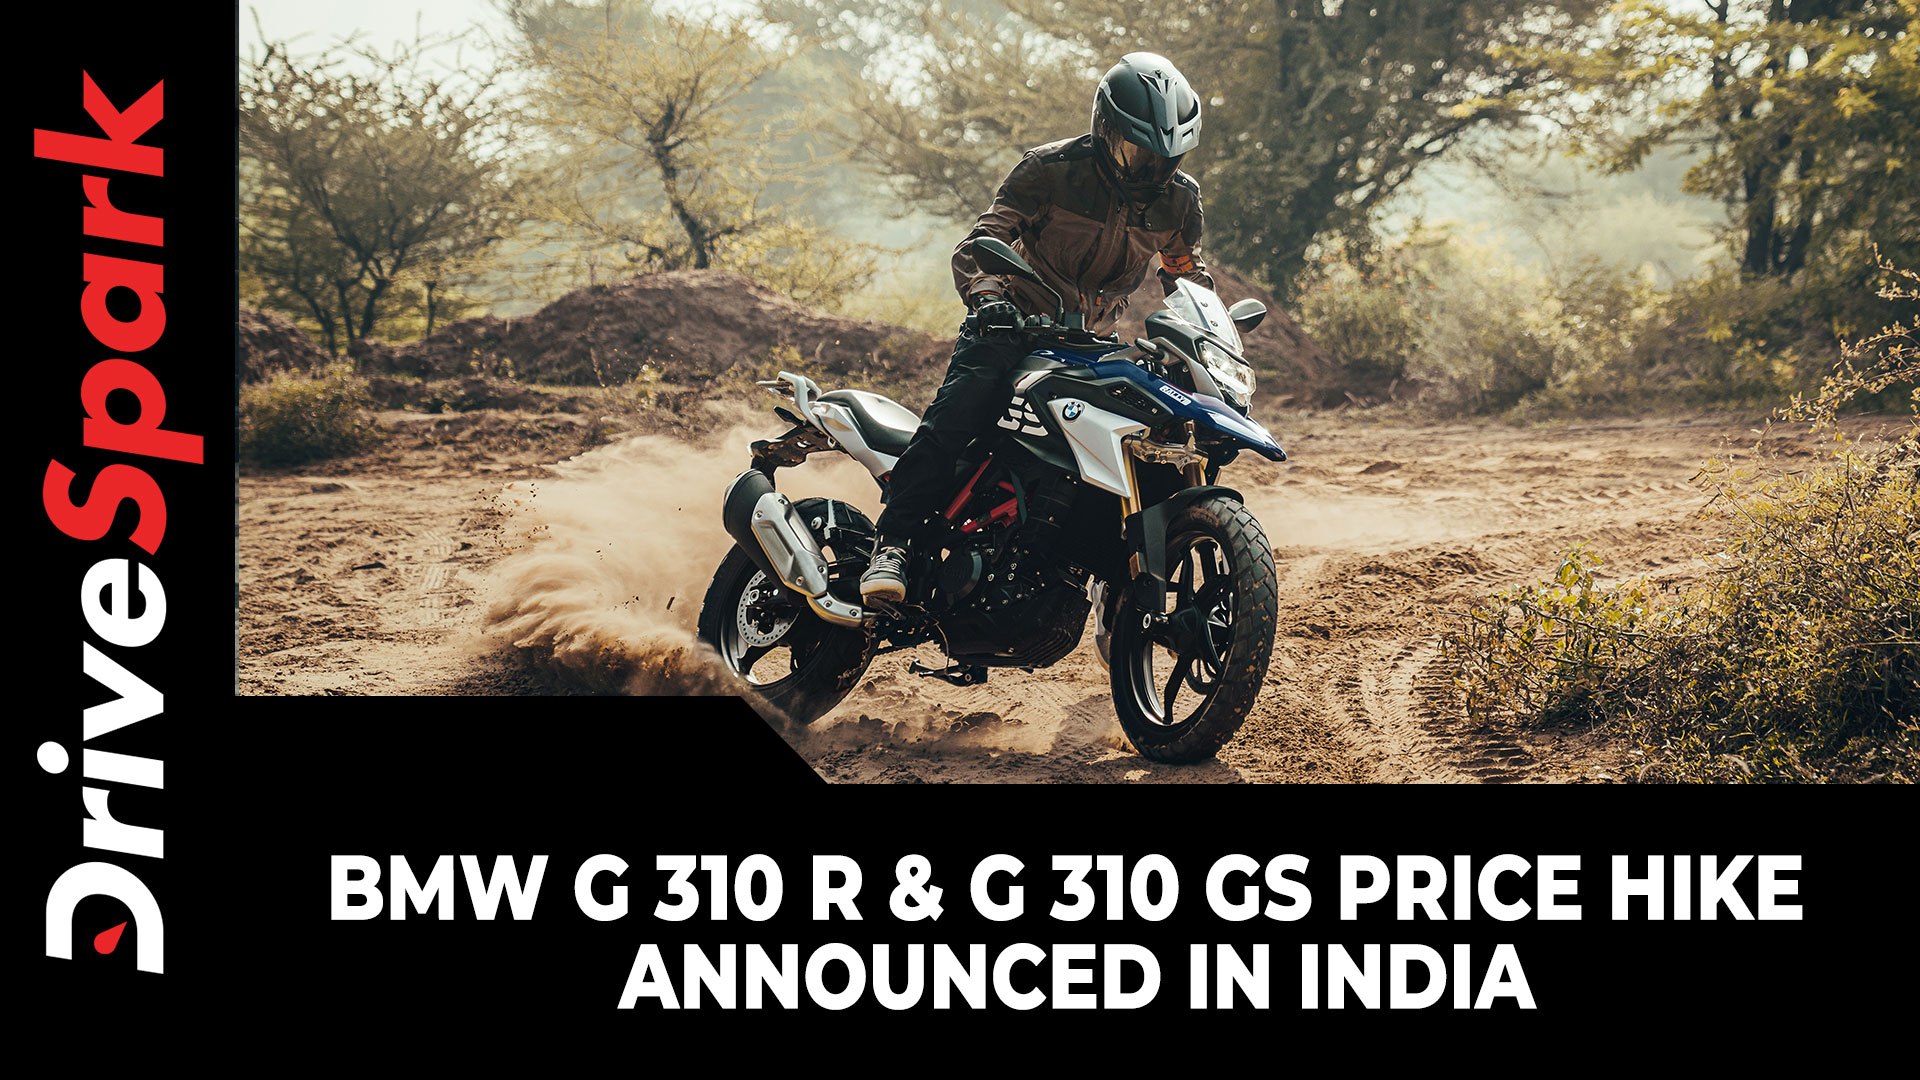 Bmw G 310 R G 310 Gs Price Hike Announced In India New Price List Other Details Video Dailymotion